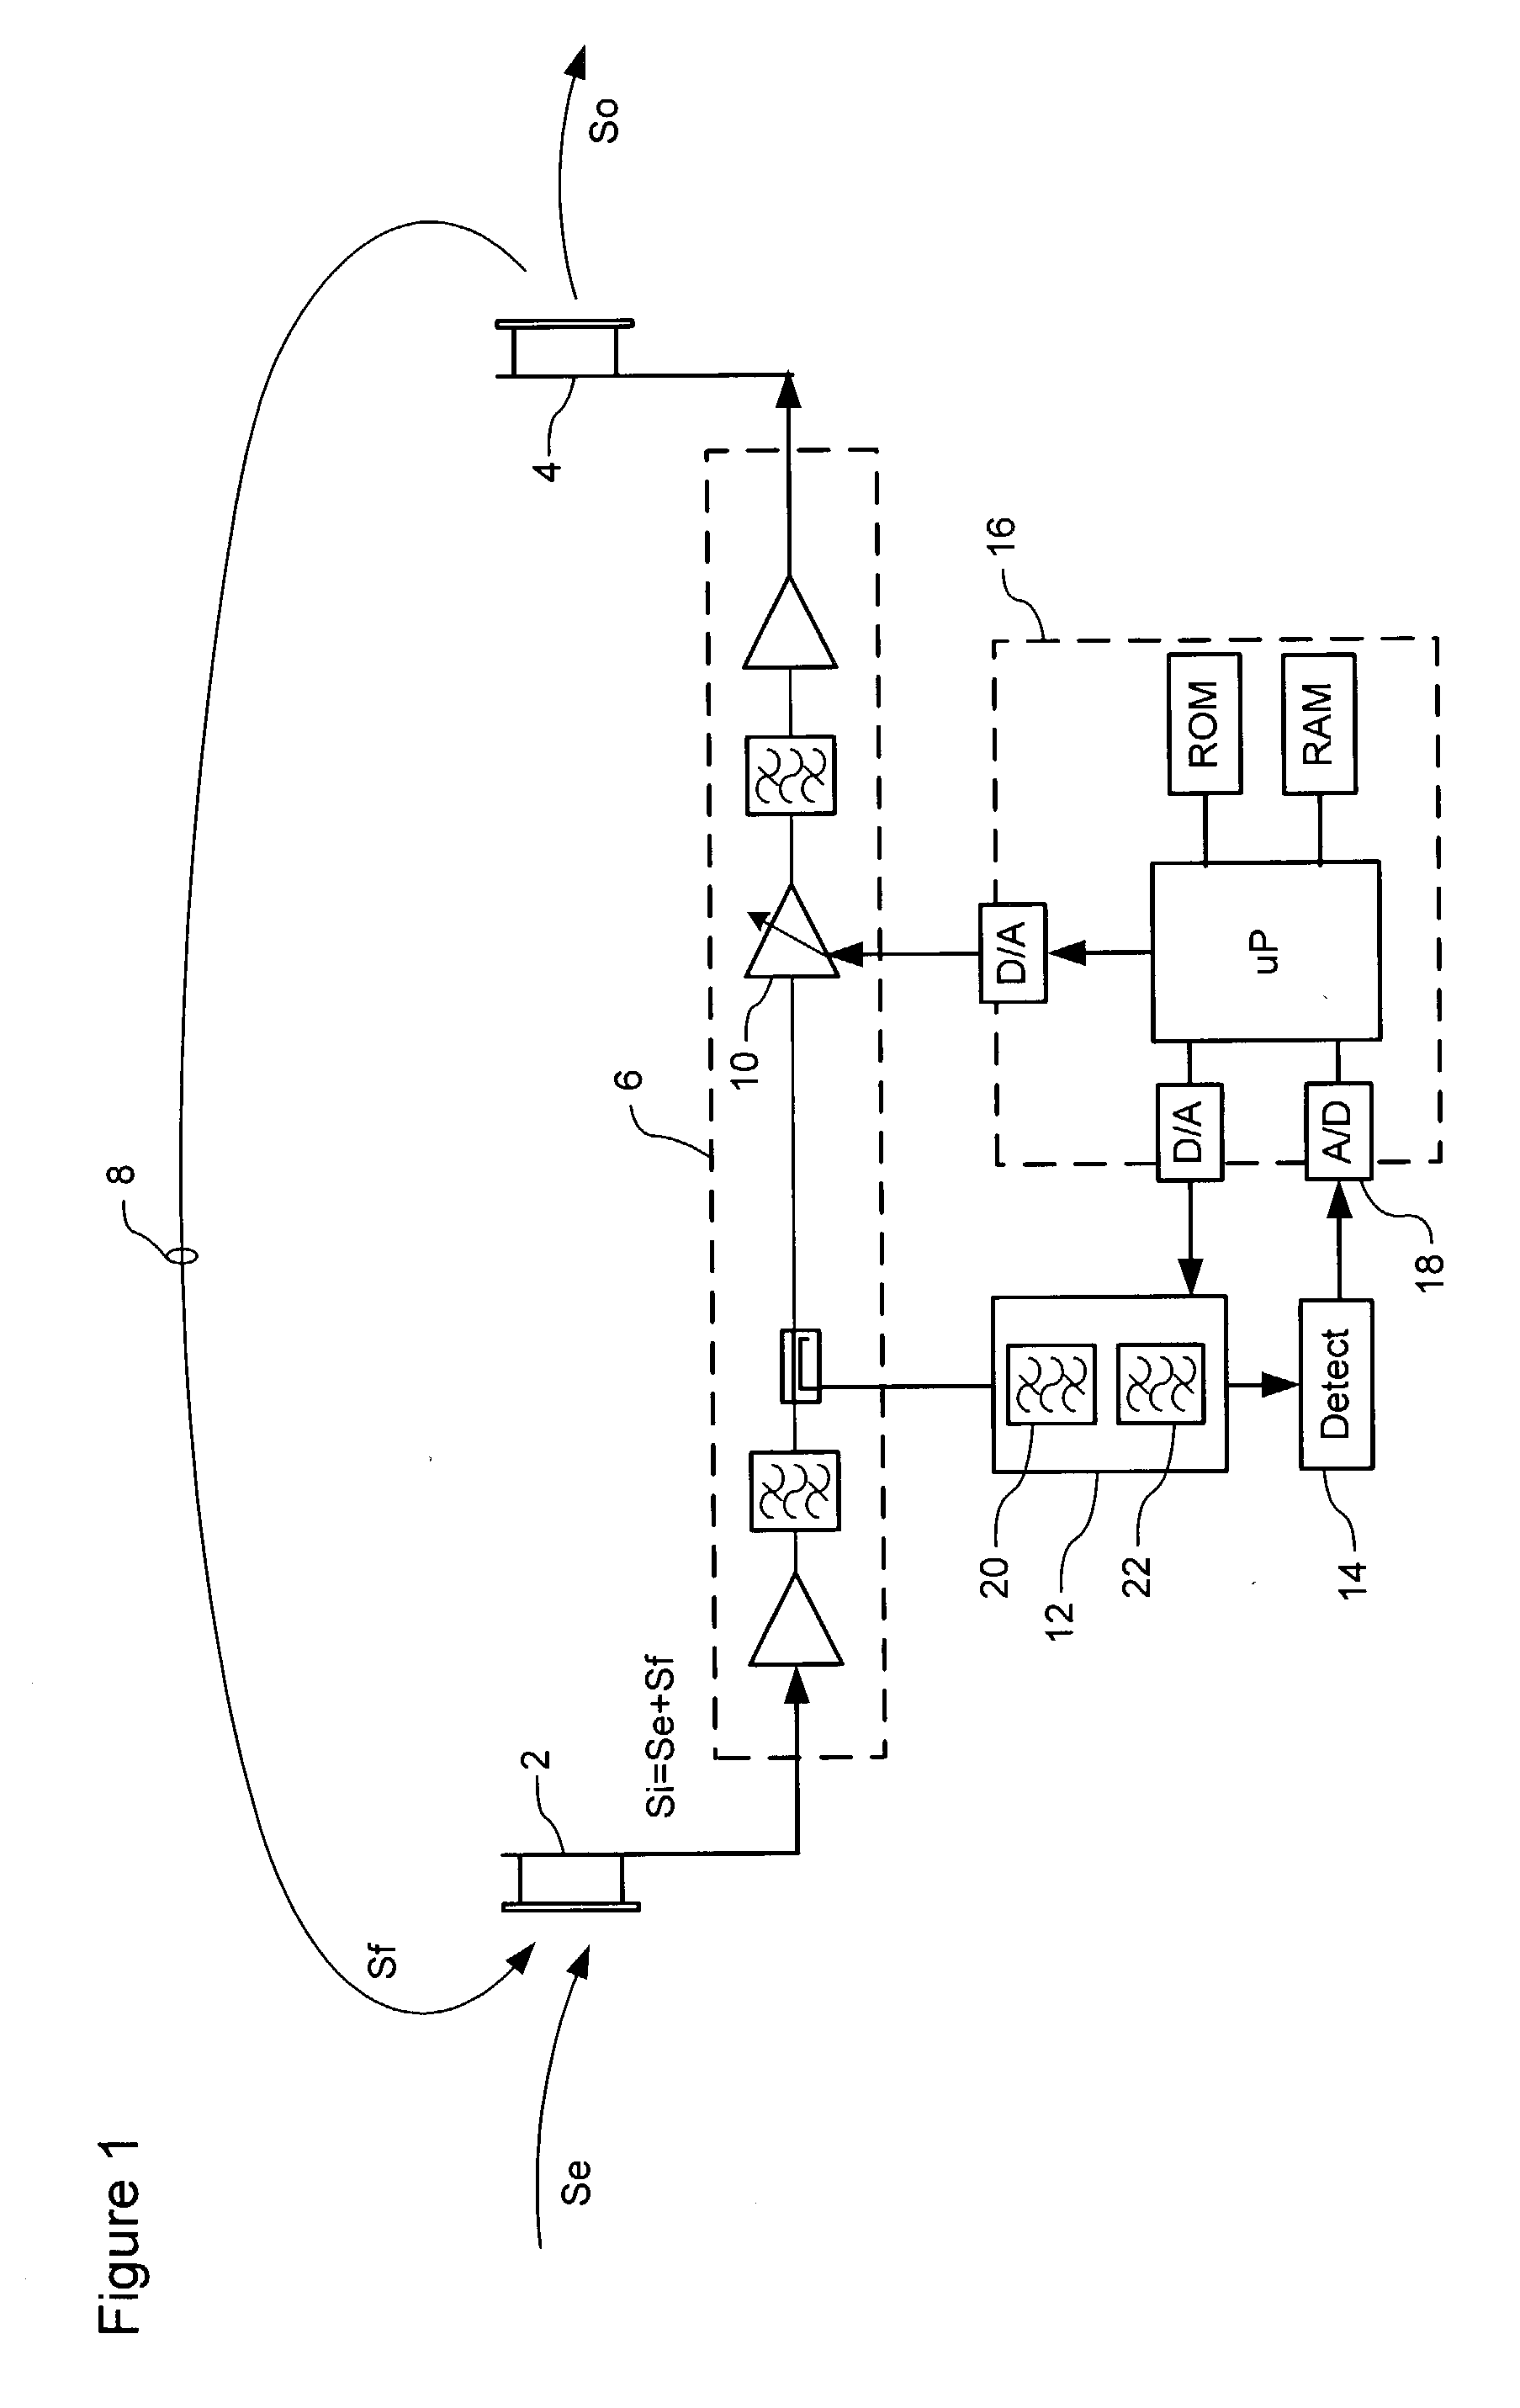 Monitoring stability of an on-frequency repeater